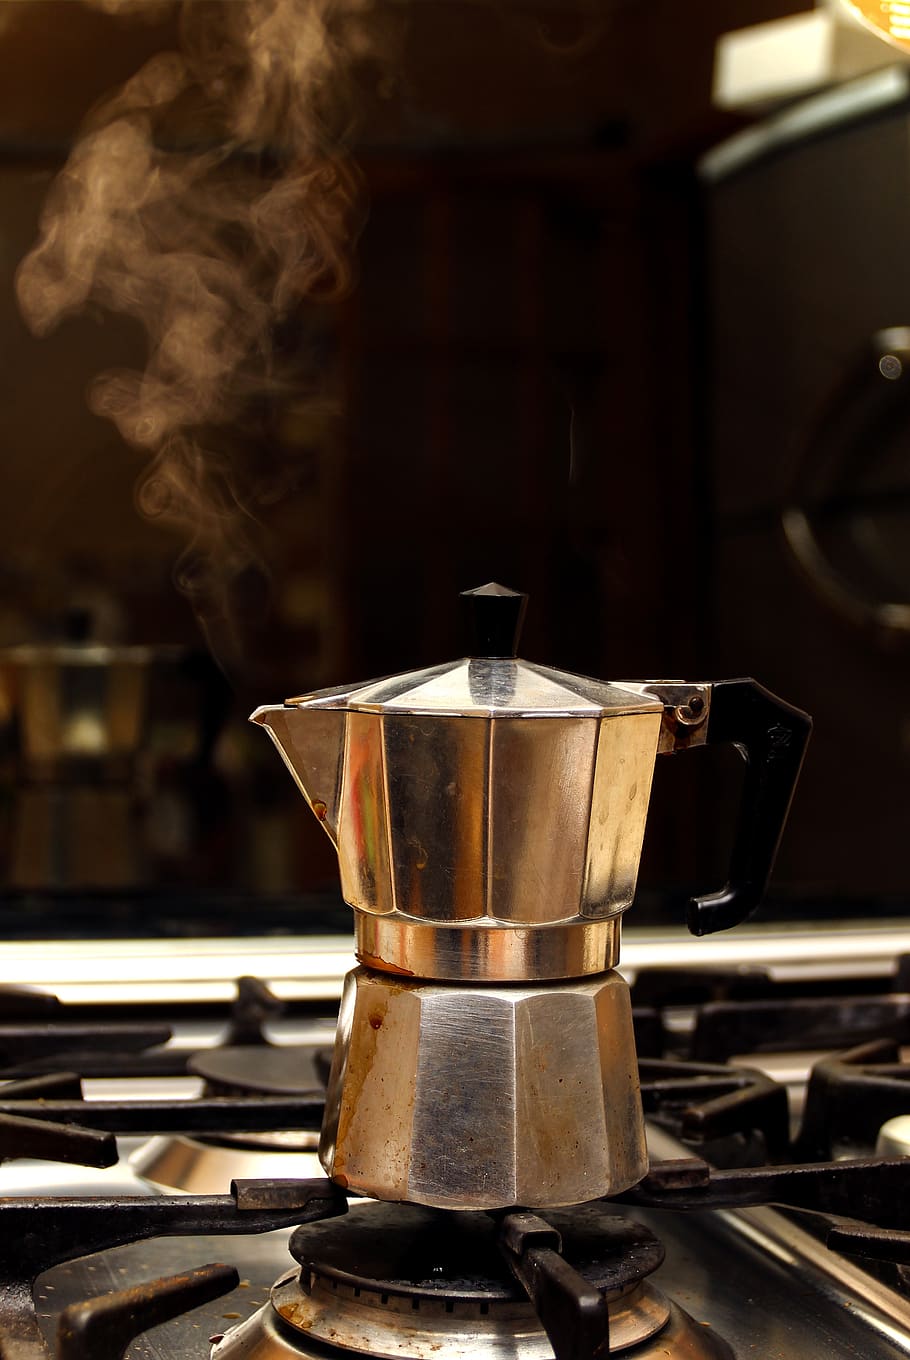 coffee maker, coffee, kitchen, stove, hot, appliance, food and drink, heat - temperature, burner - stove top, coffee - drink